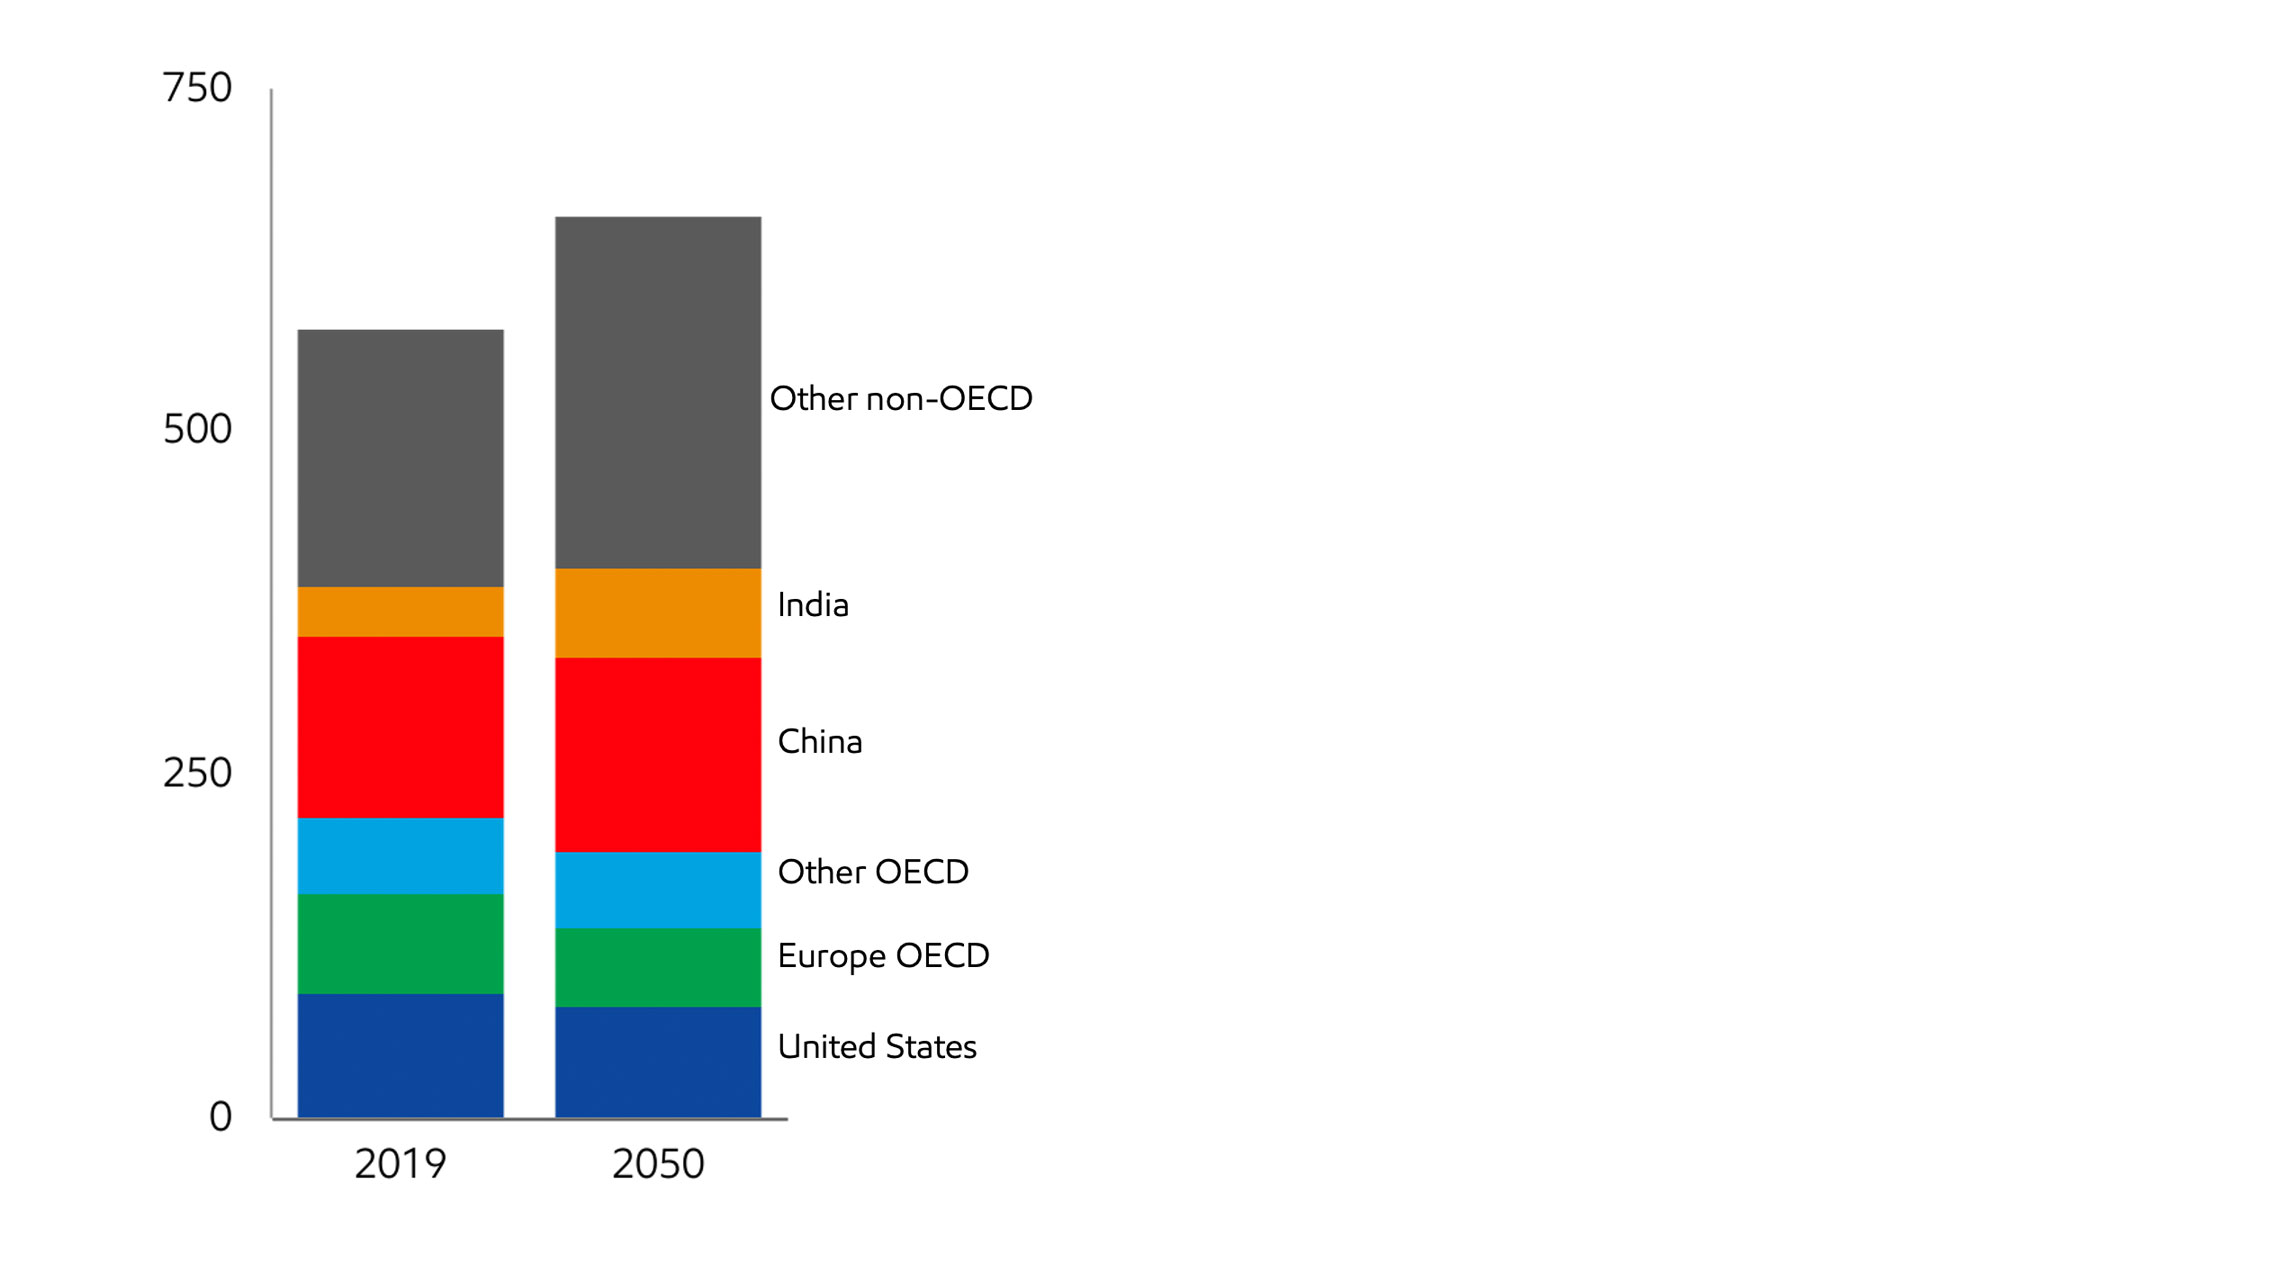 Image Energy demand led by non-OECD